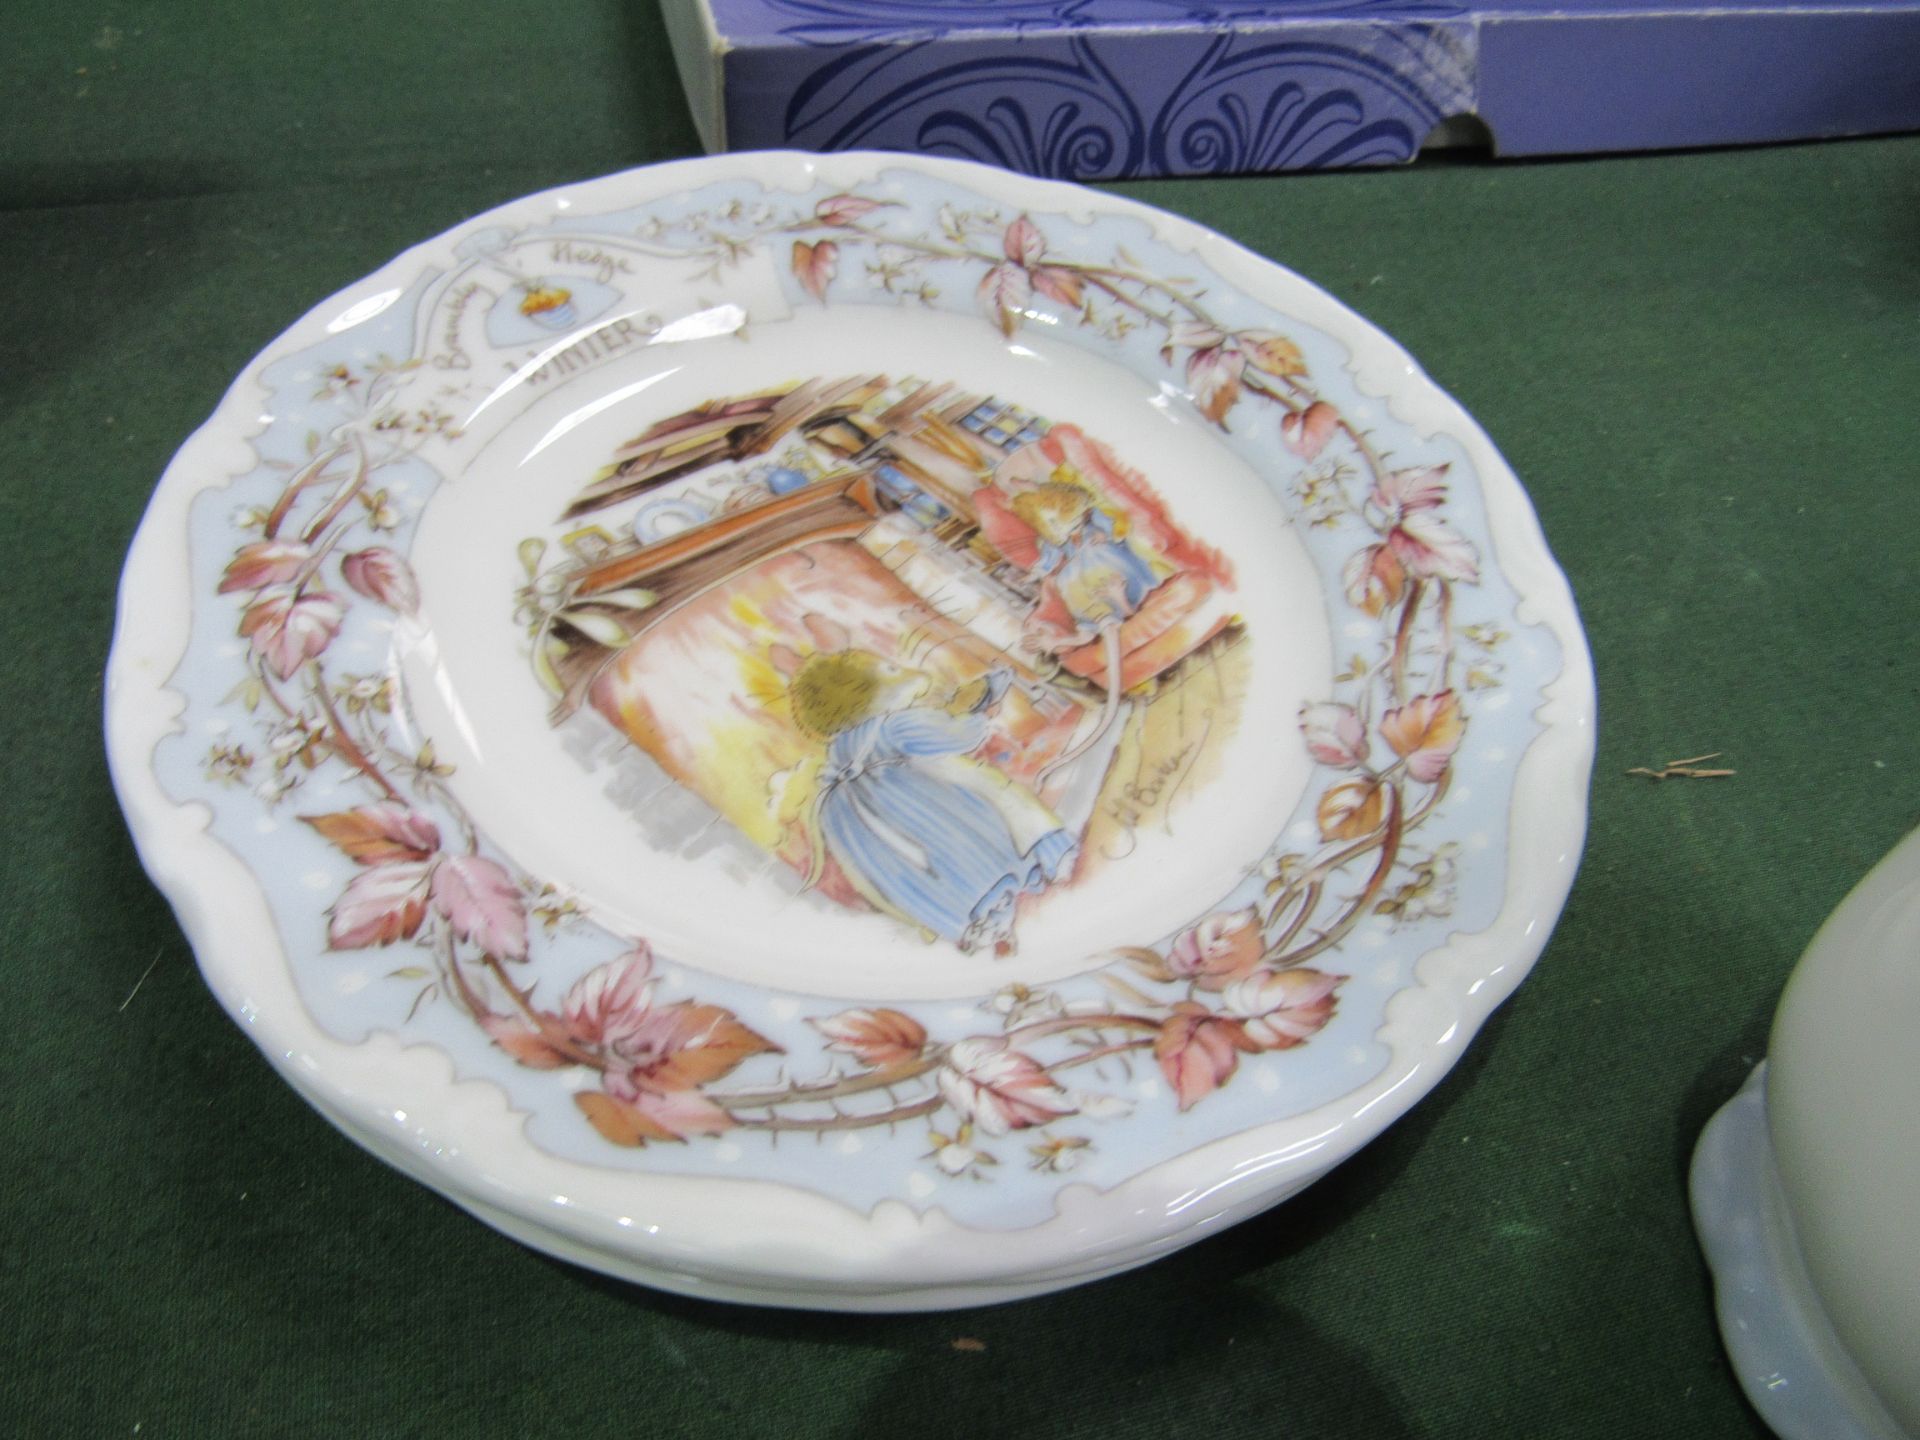 Royal Doulton Merry Midwinter from the Bramley Hedge gift collection, 8 tea plates, 3 saucers and - Image 3 of 5